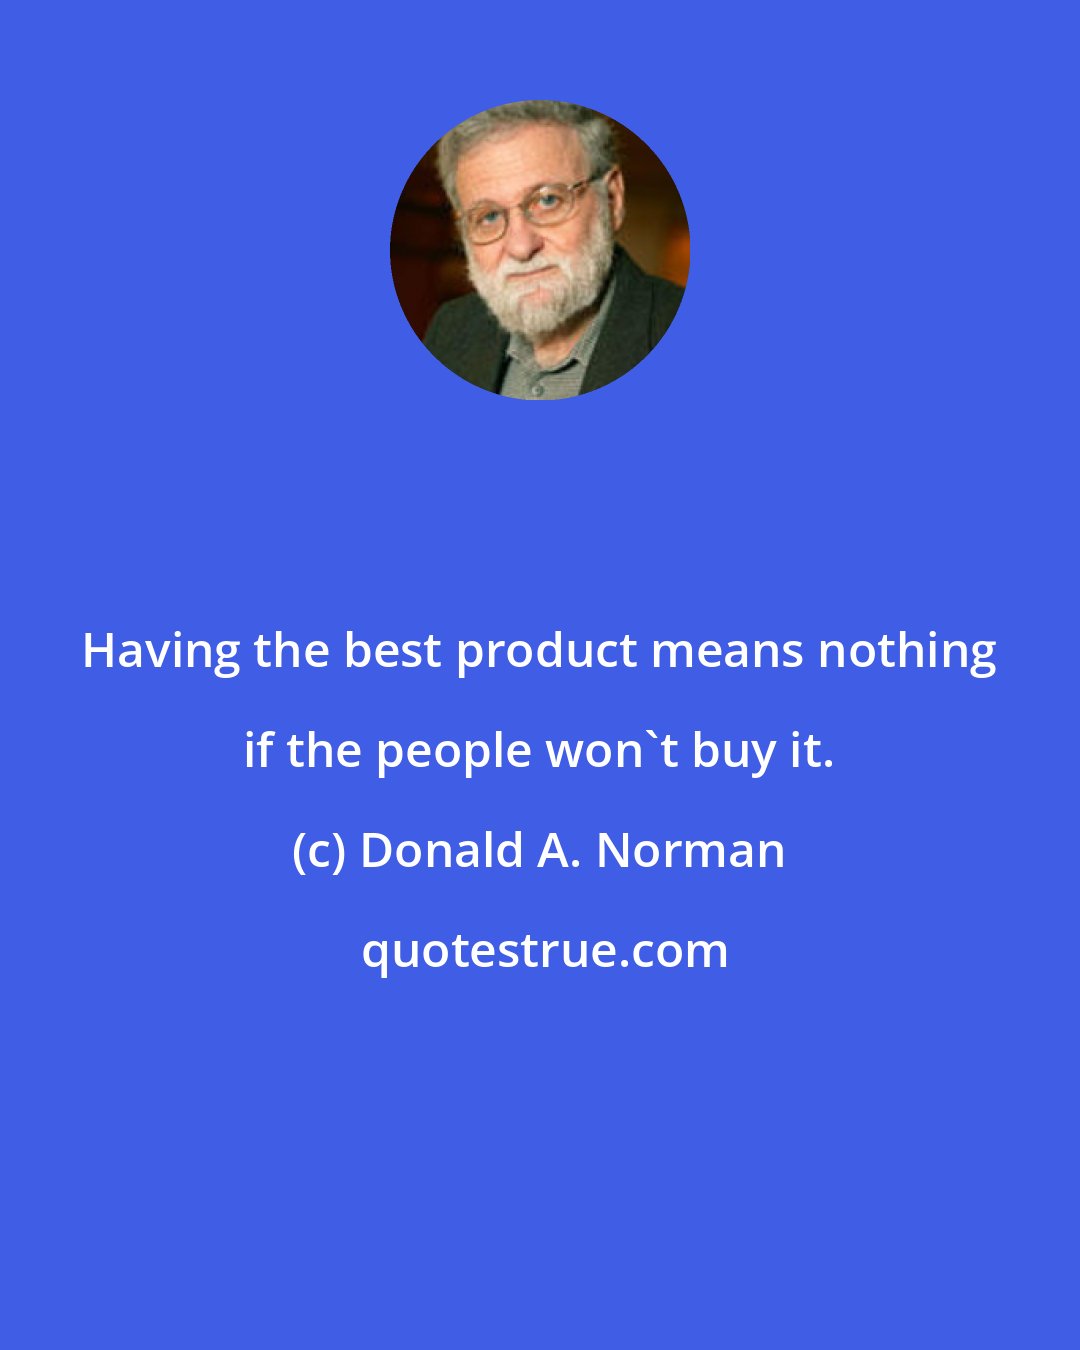 Donald A. Norman: Having the best product means nothing if the people won't buy it.